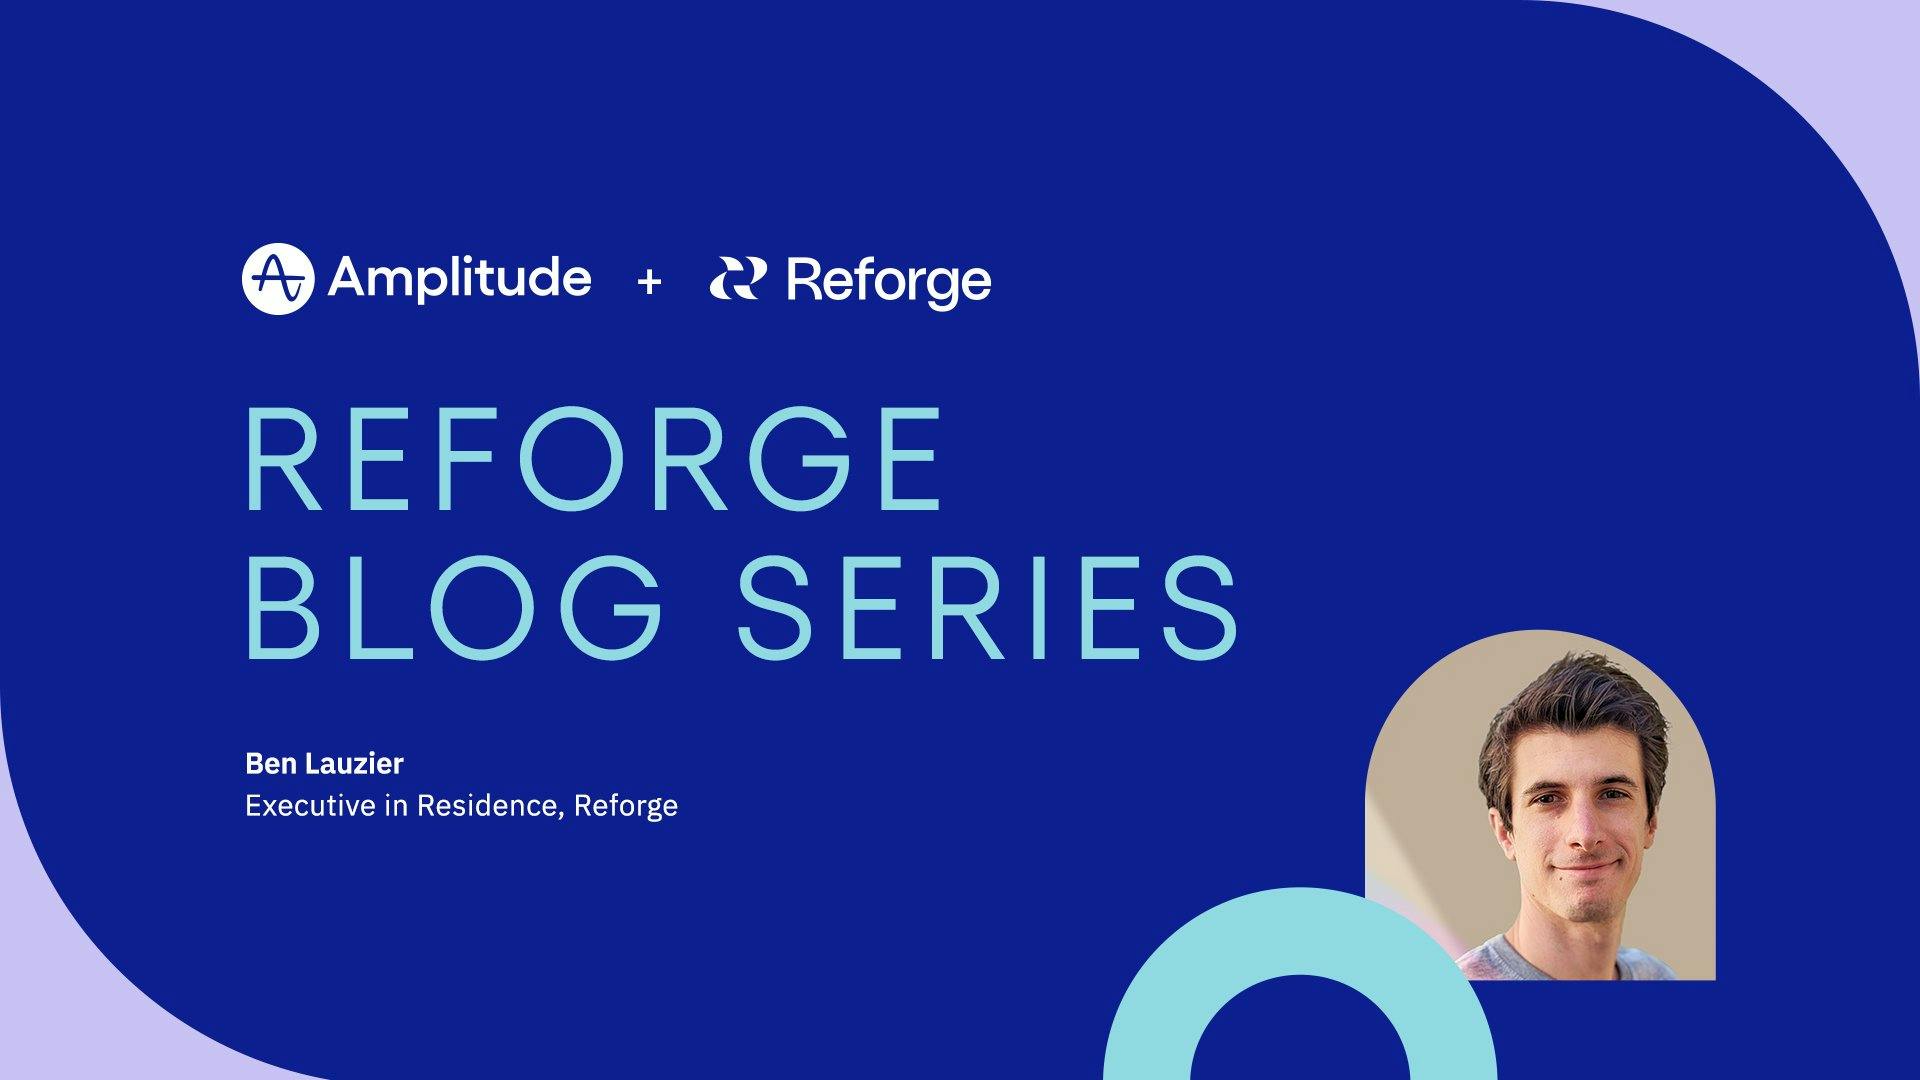 Reforge Blog Series blue, purple and teal header image in Amplitude branding with headshot featuring Ben Lauzier